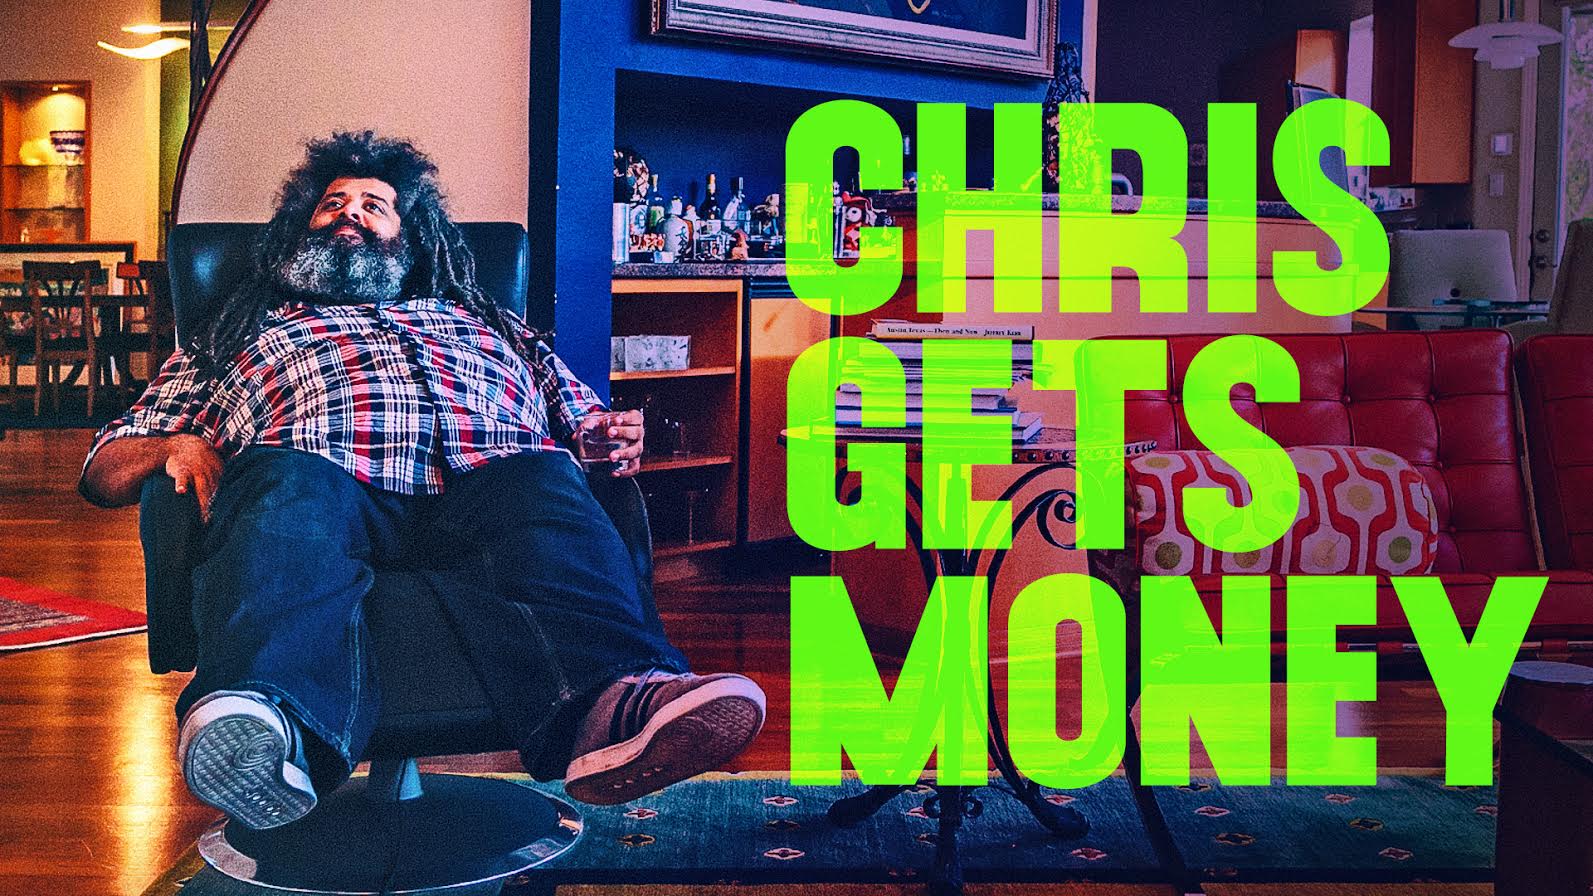 Watch Chris Cubas join the 1% for one month on “Chris Gets Money” on Fusion